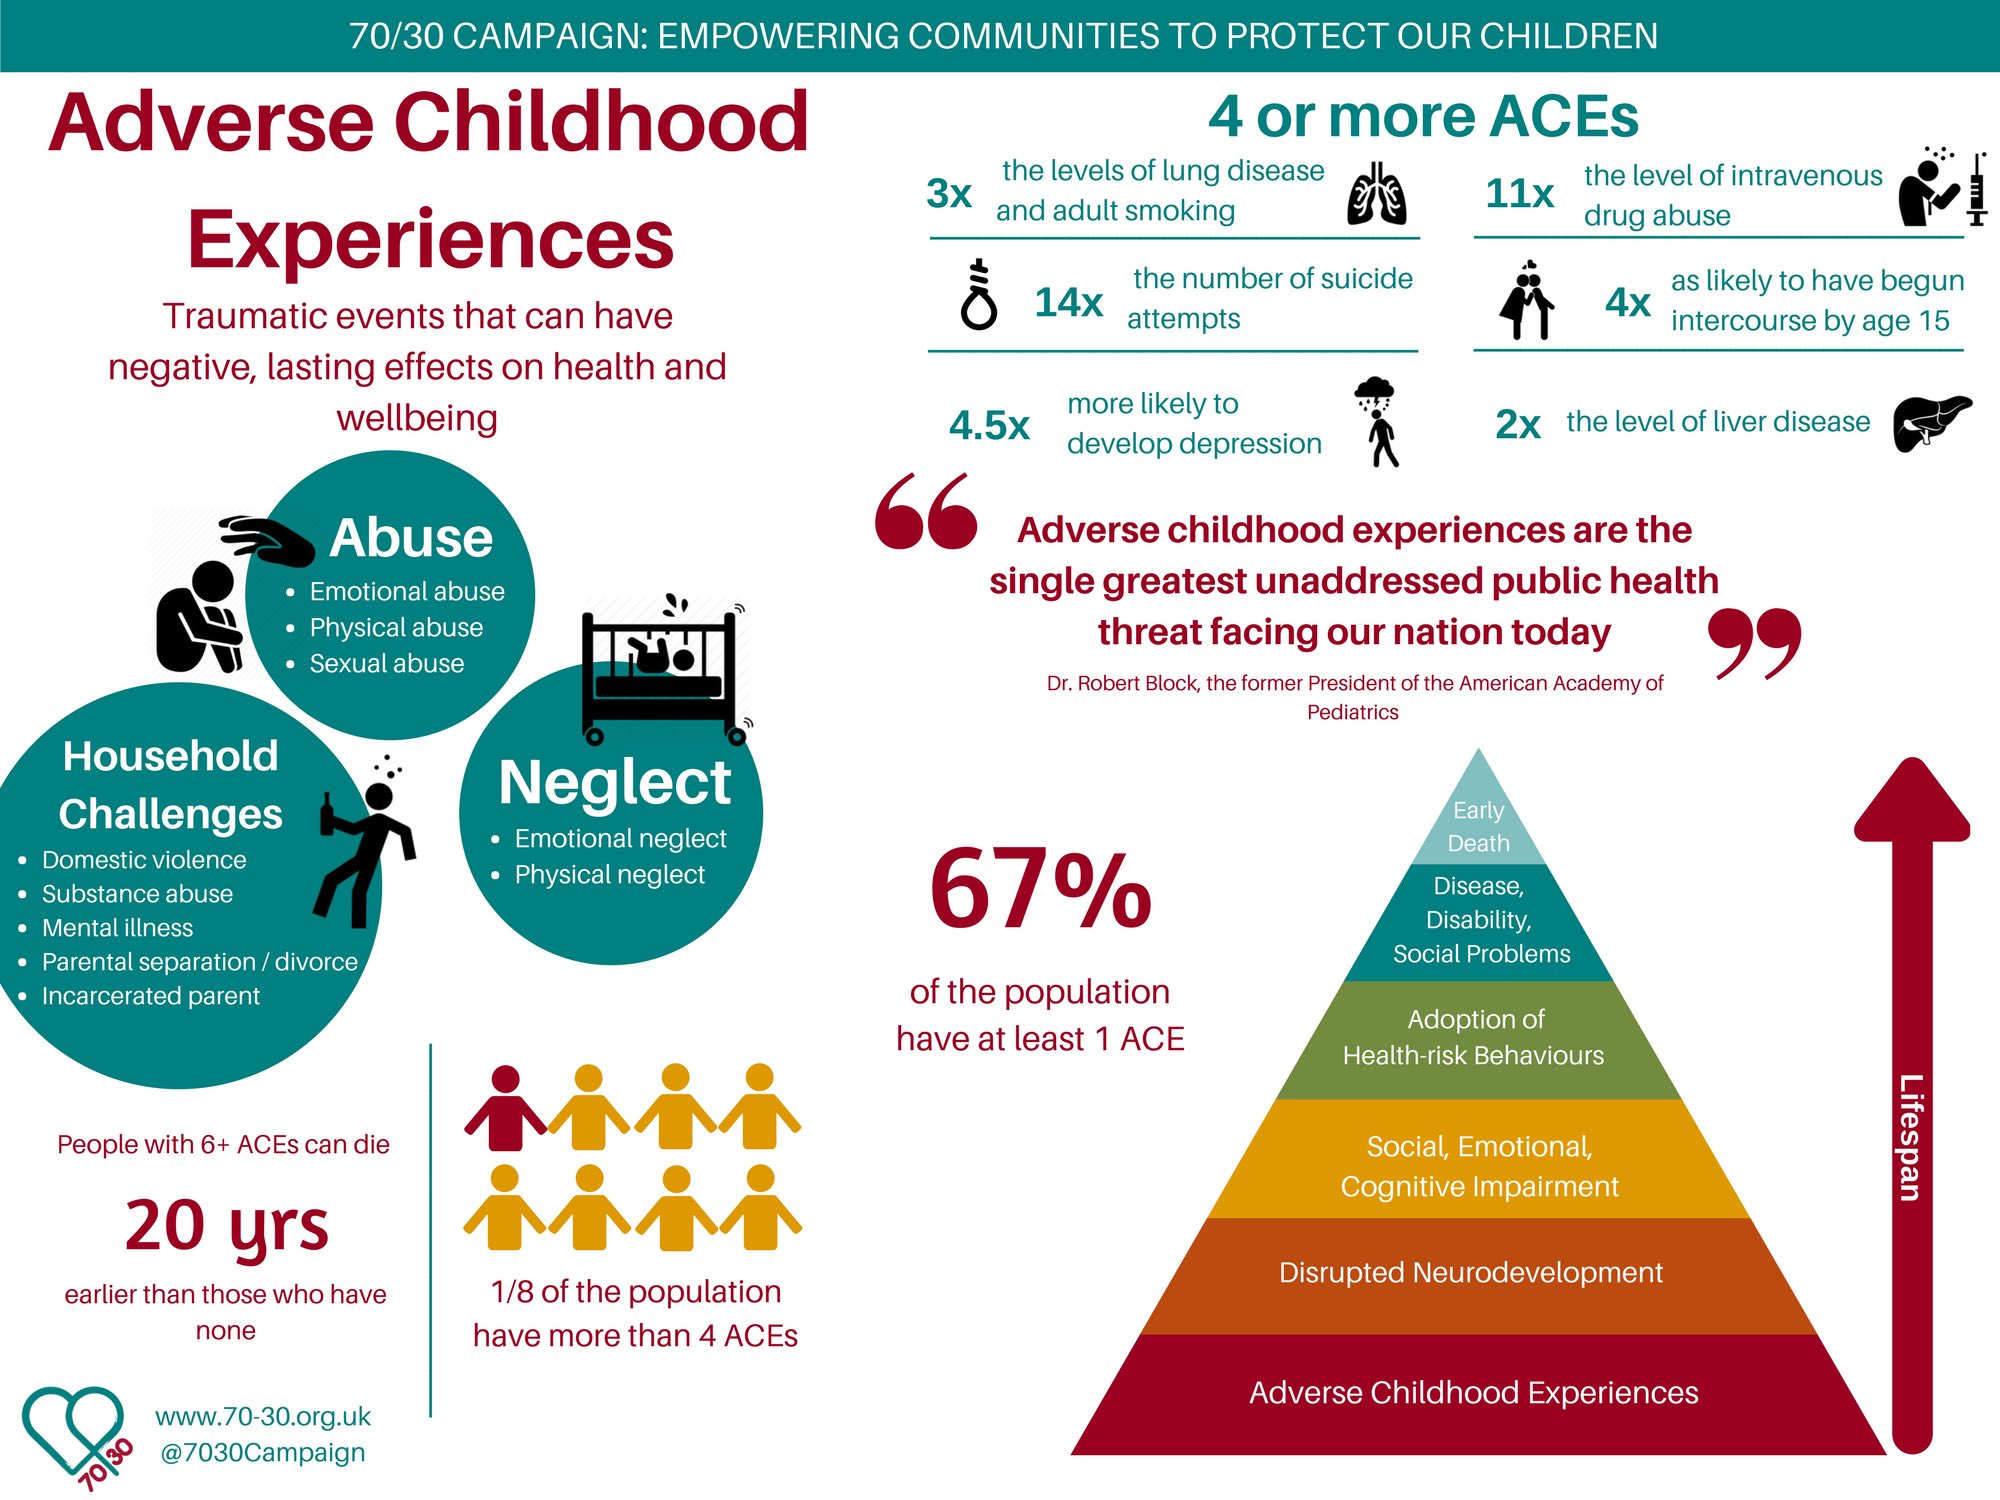 Adverse Childhood Experiences Source: 70/30 Campaign Twitter